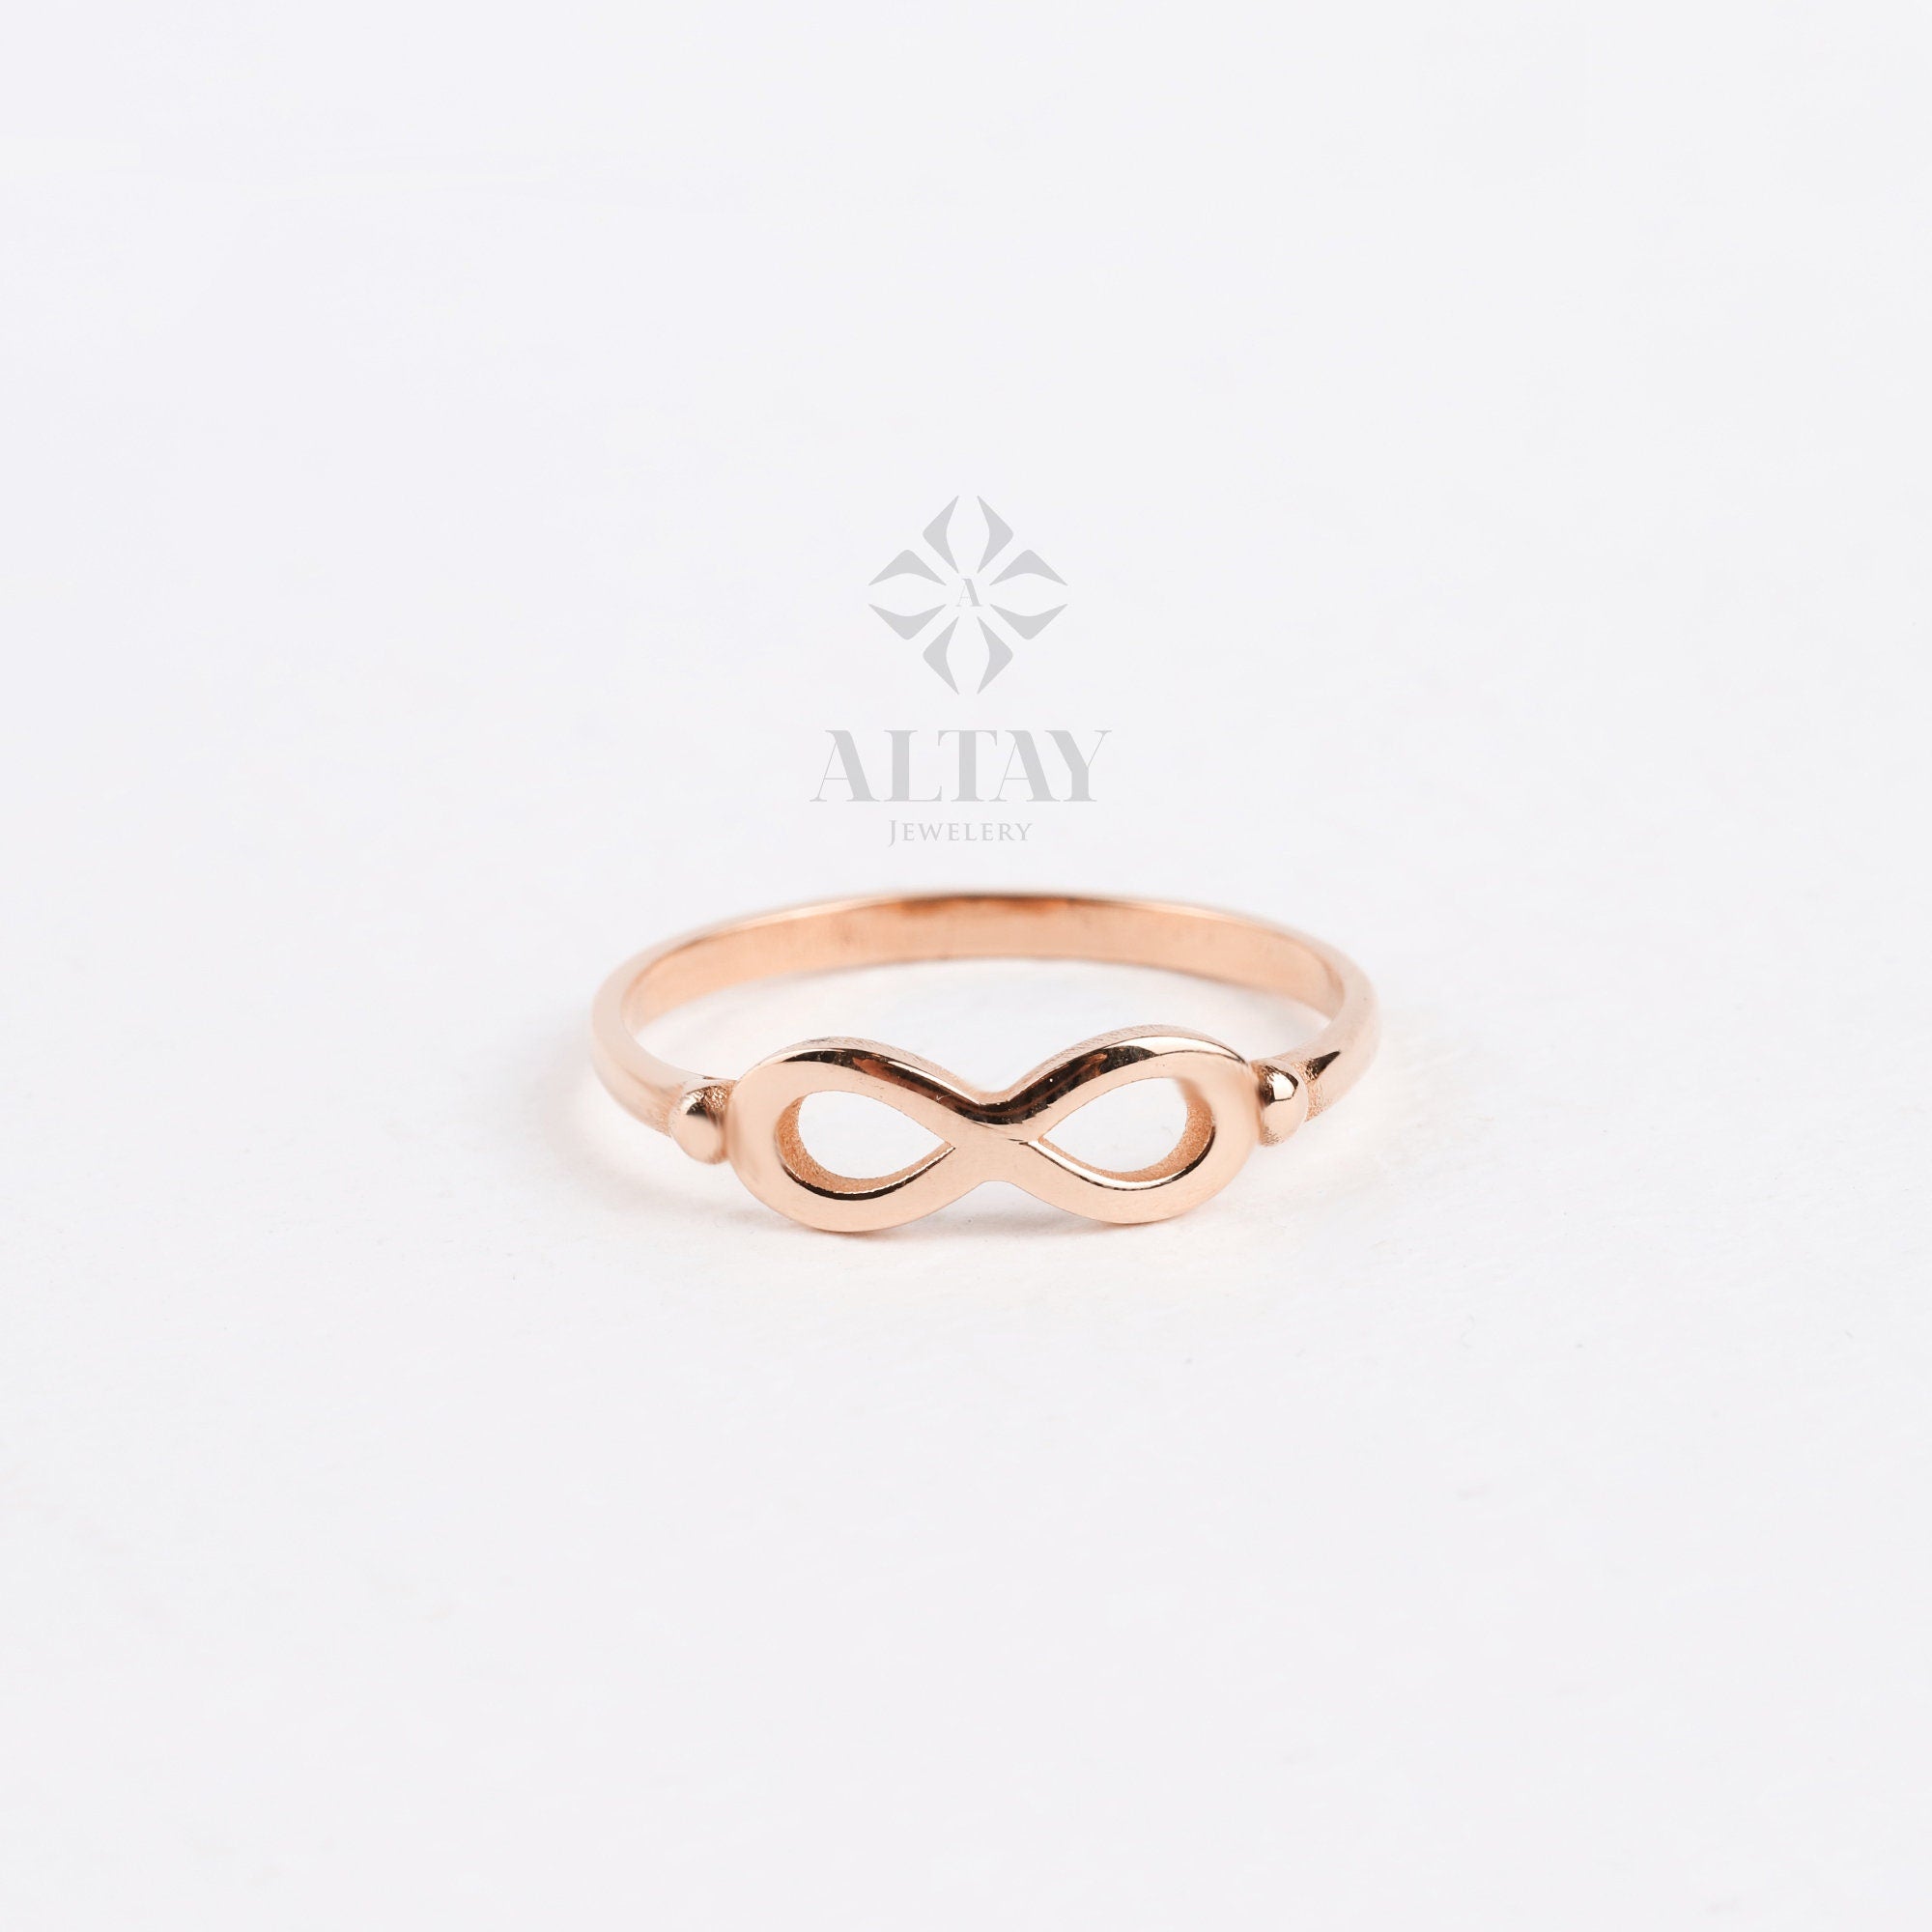 14K Solid Gold Infinity Ring, Wedding Band, Engagement Ring, Long Life Symbol, Gift For Her, Minimalist Fine Jewelry, Everydaywear Jewelry